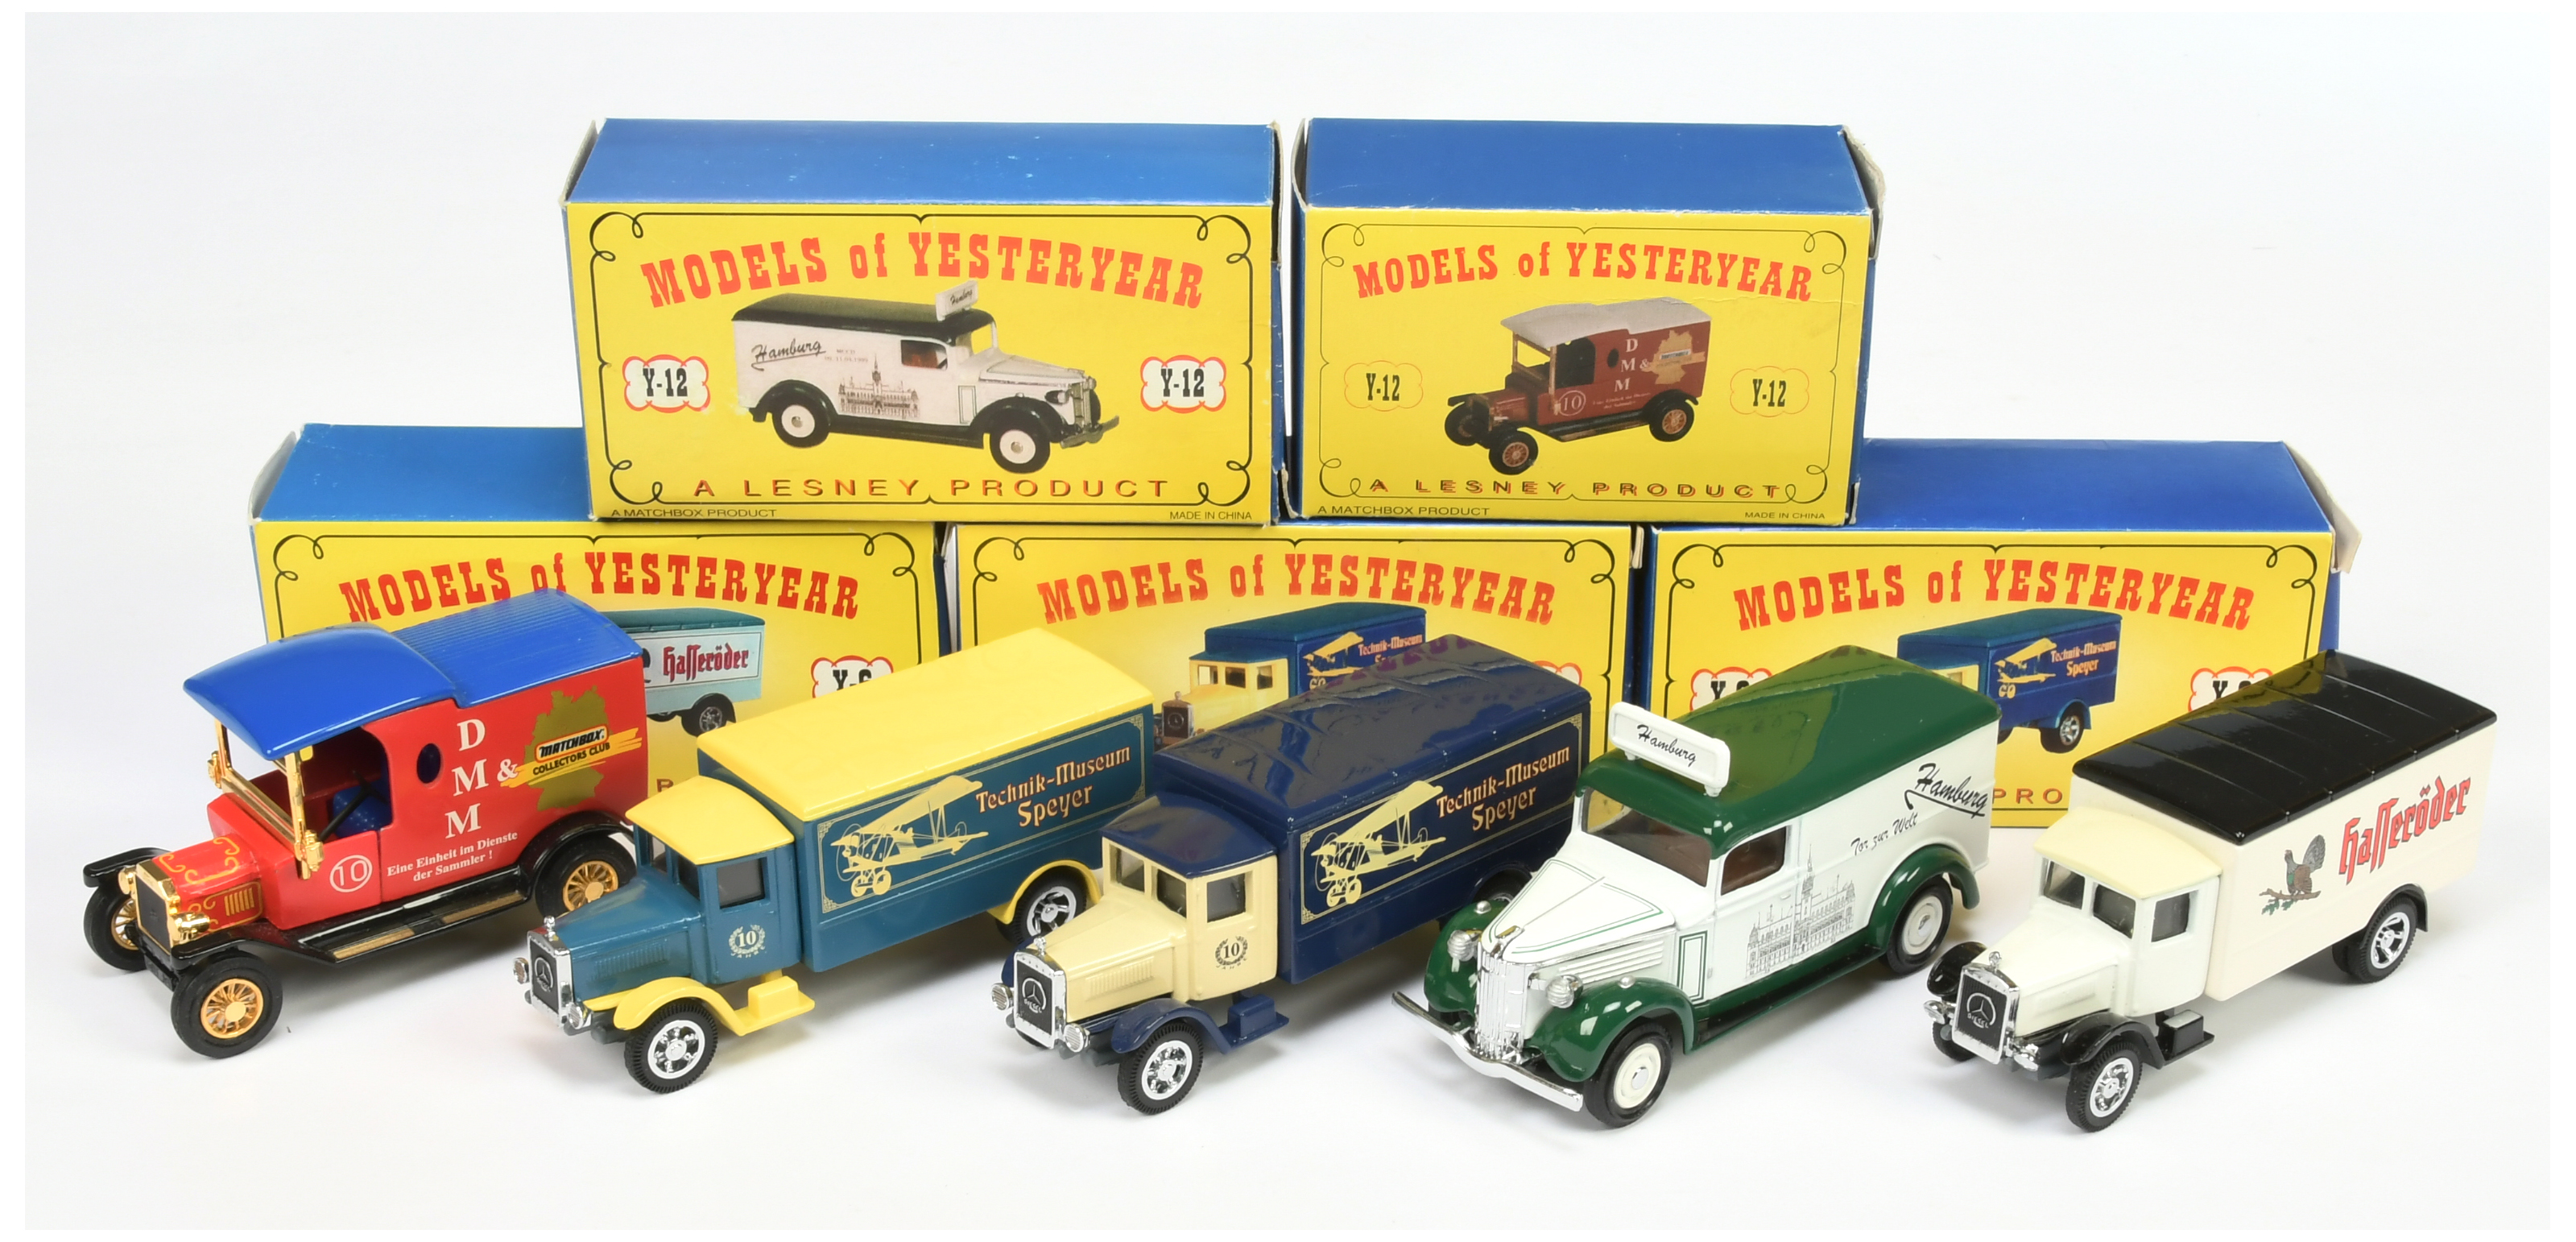 Matchbox Models of Yesteryear Code 2 issues including Y6 1932 Mercedes Benz L5 Truck "Hasseroder"...